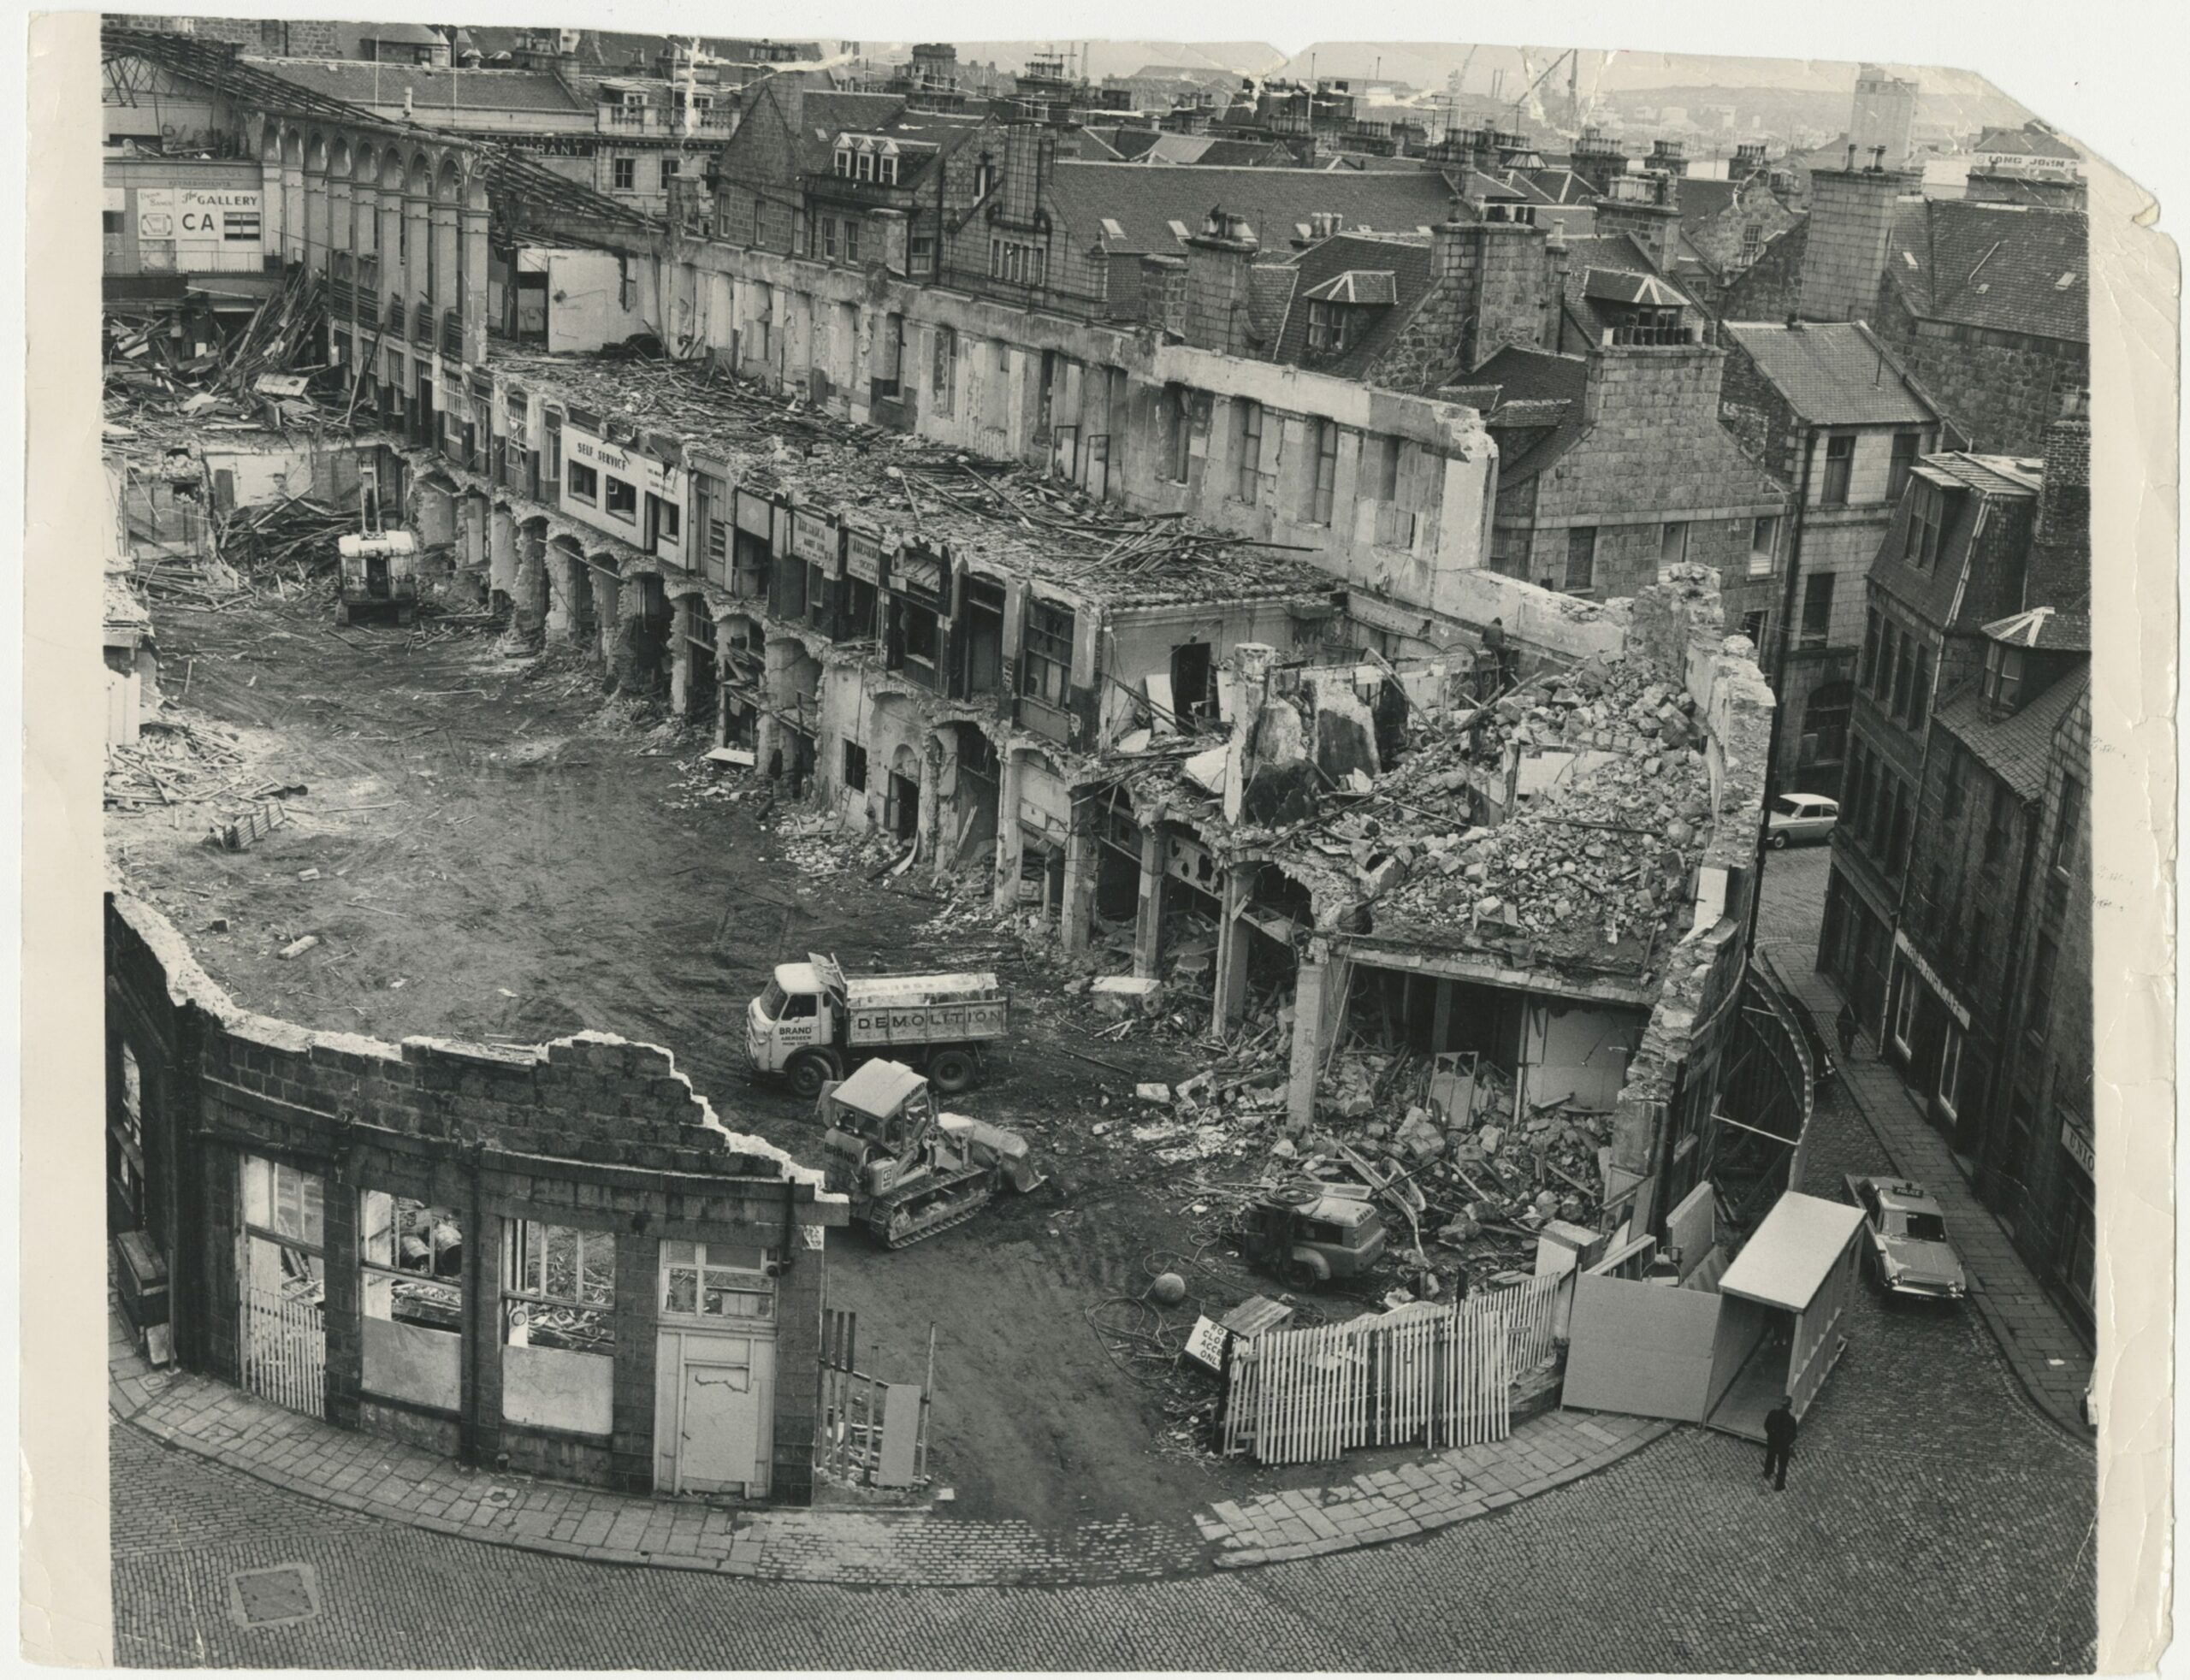 Aberdeen Market in 1971 after demolition work started on the building to make way for the new centre.